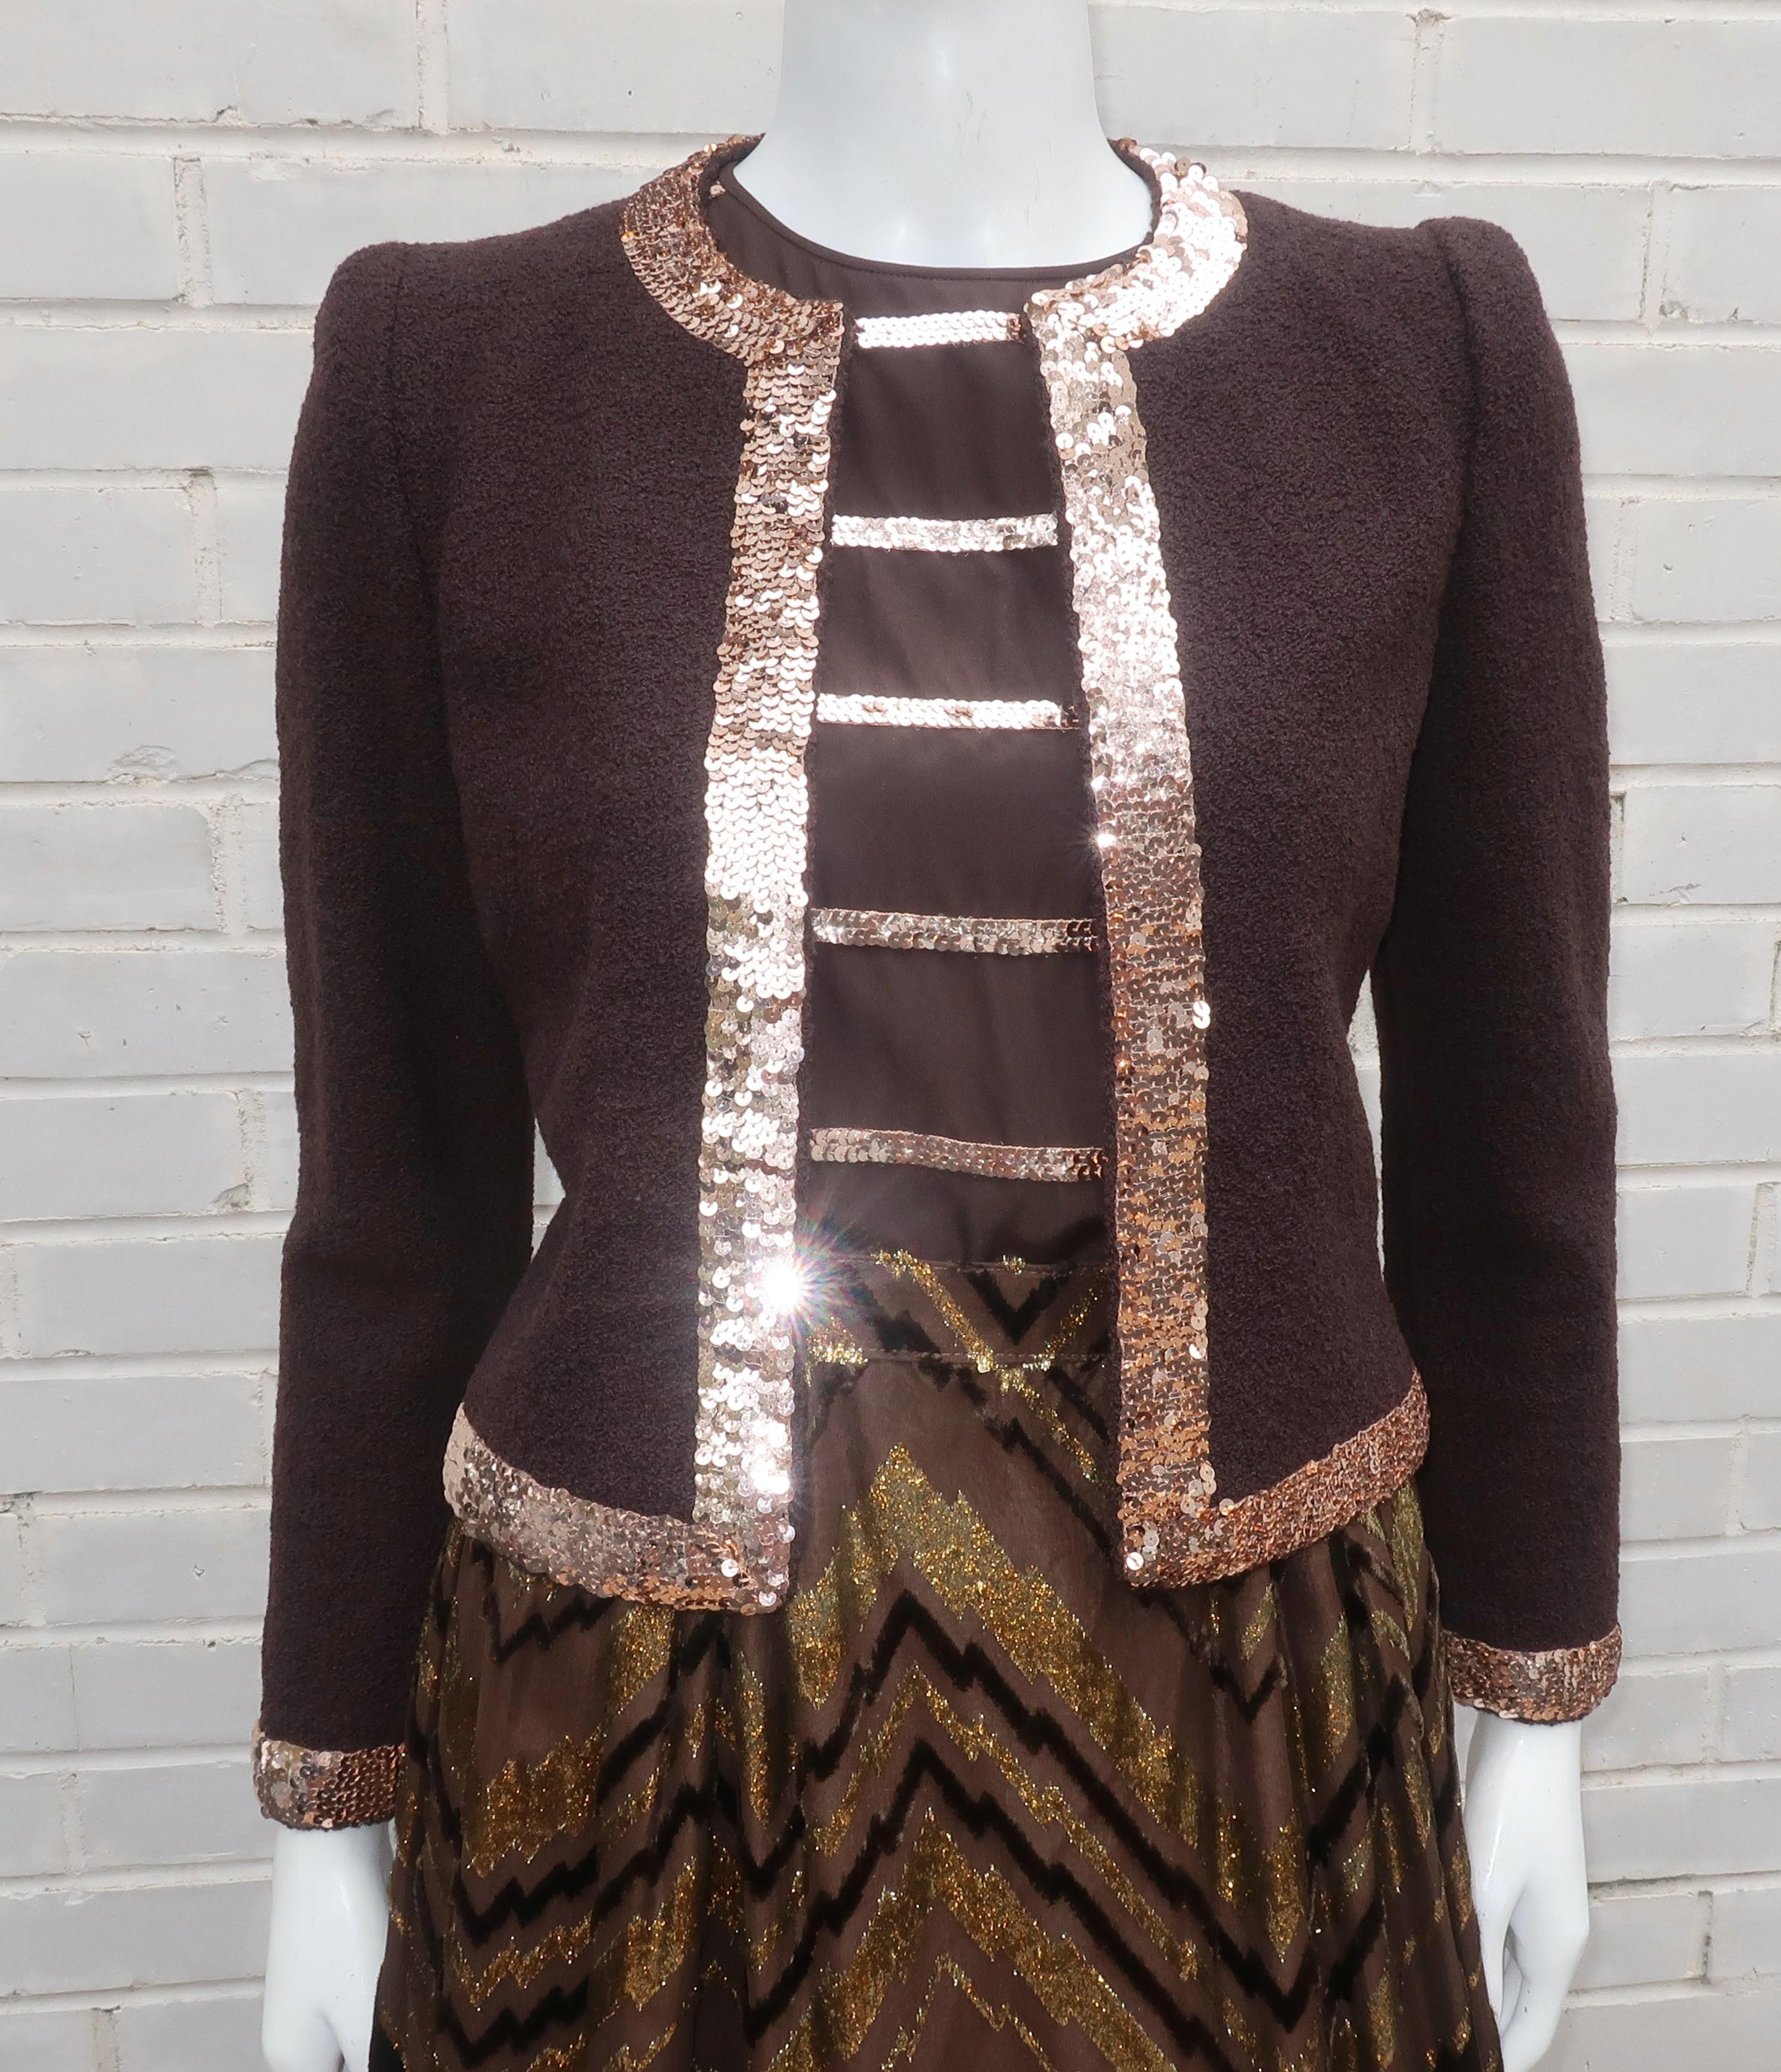 1960's Adolfo at Saks Fifth Avenue three piece evening ensemble consisting of a jacket, shell top and maxi skirt all in shades of dark chocolate brown and gold.  The open collar wool boucle jacket is embellished with gold sequins at the neckline and